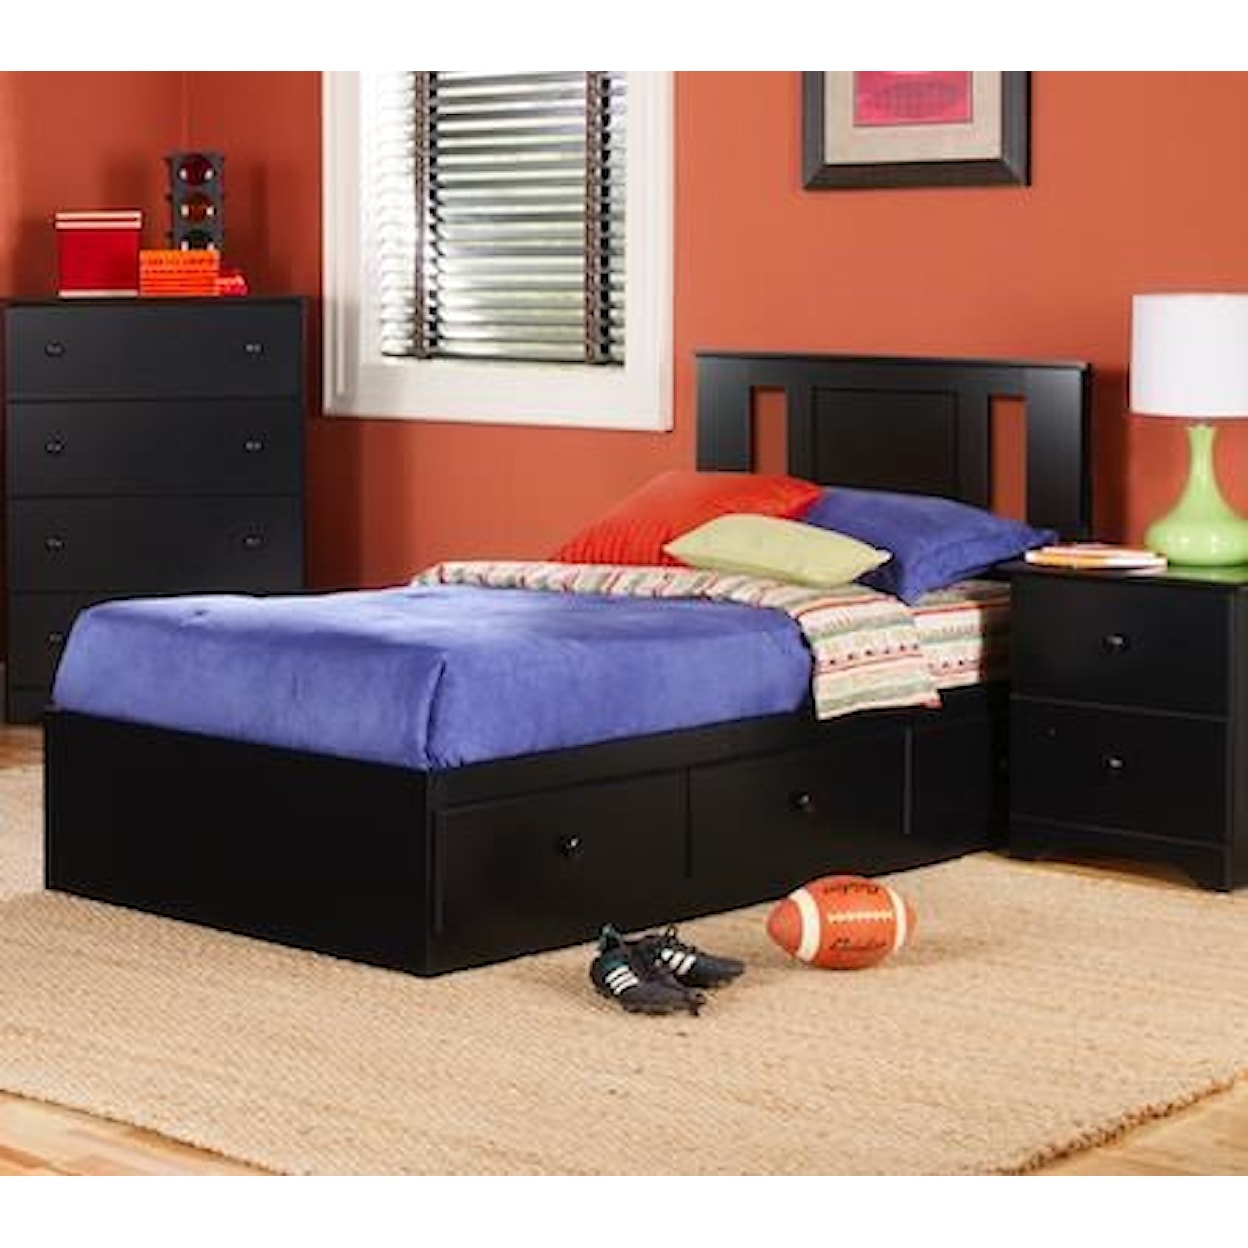 Perdue 5000 Series Twin Mates Storage Bed